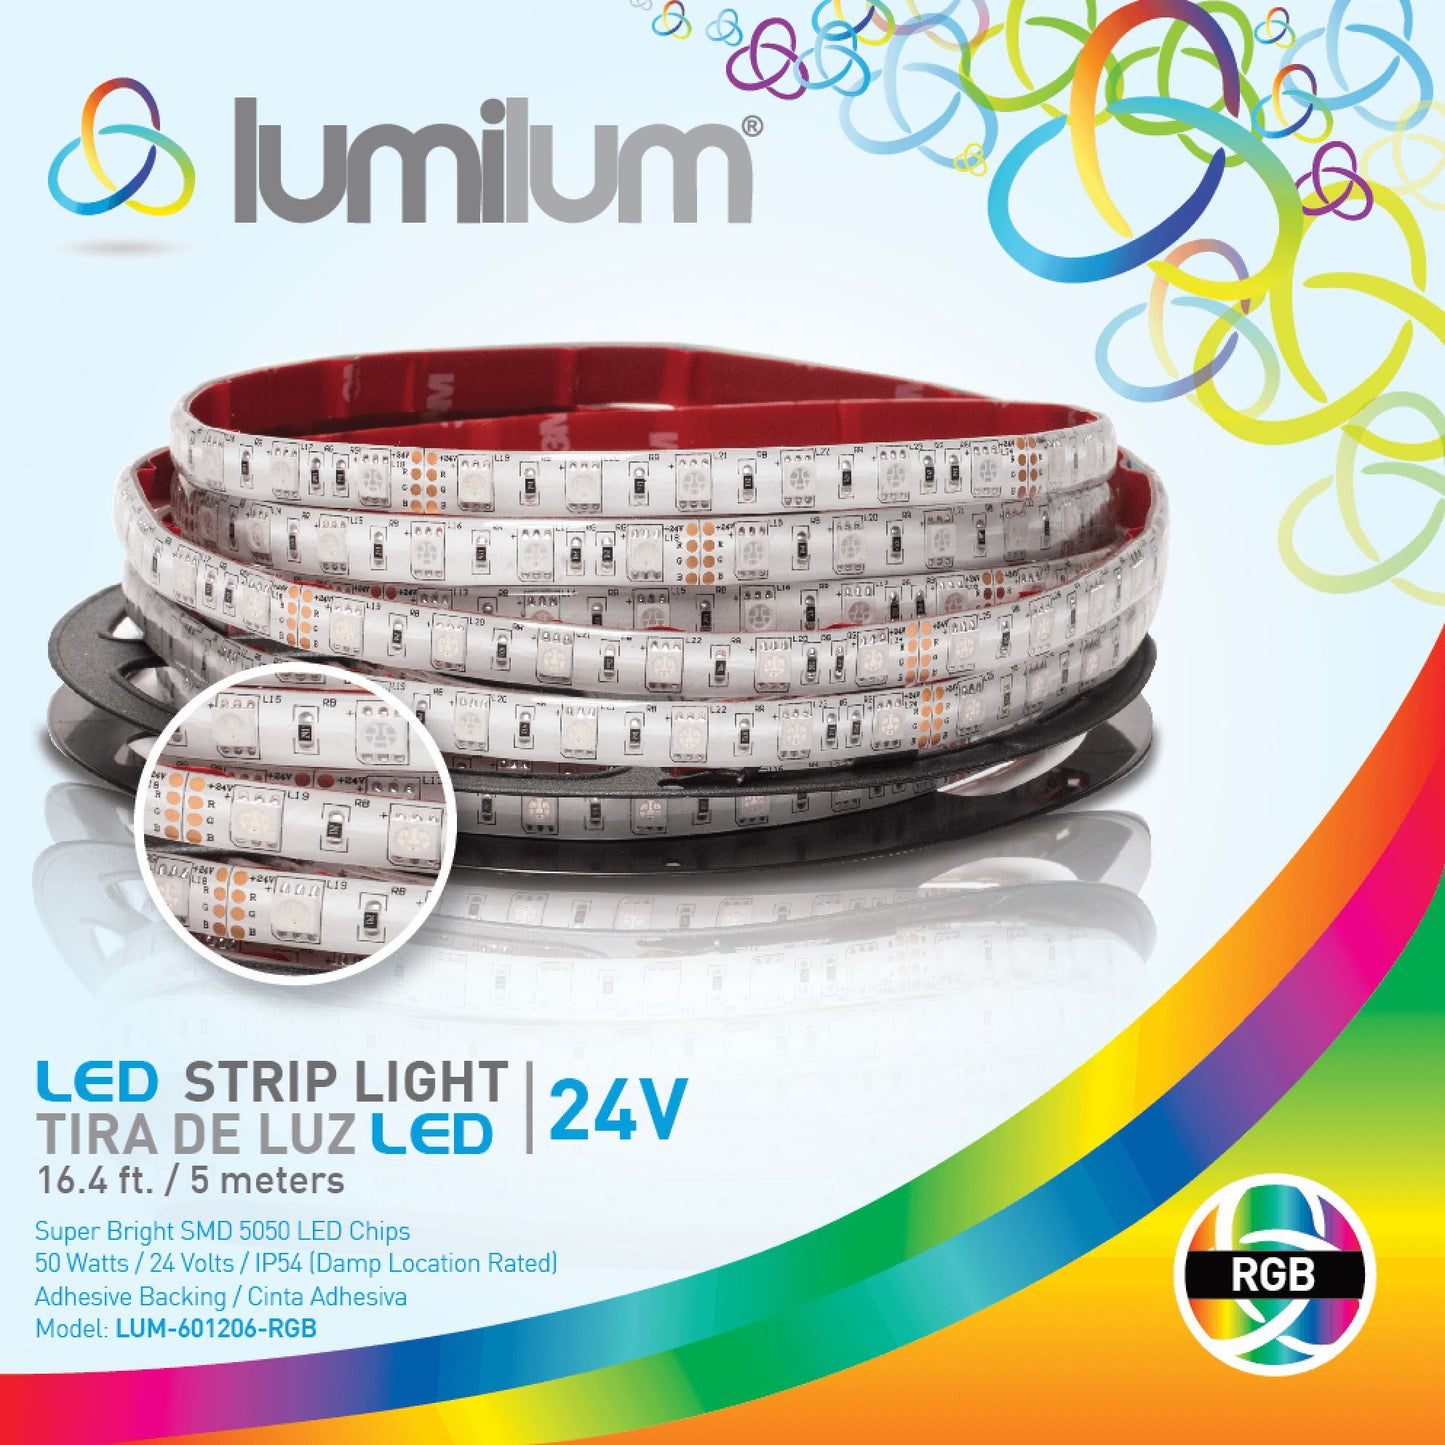 Lumectra RGB LED Light Strip - 18 ft., Accessories